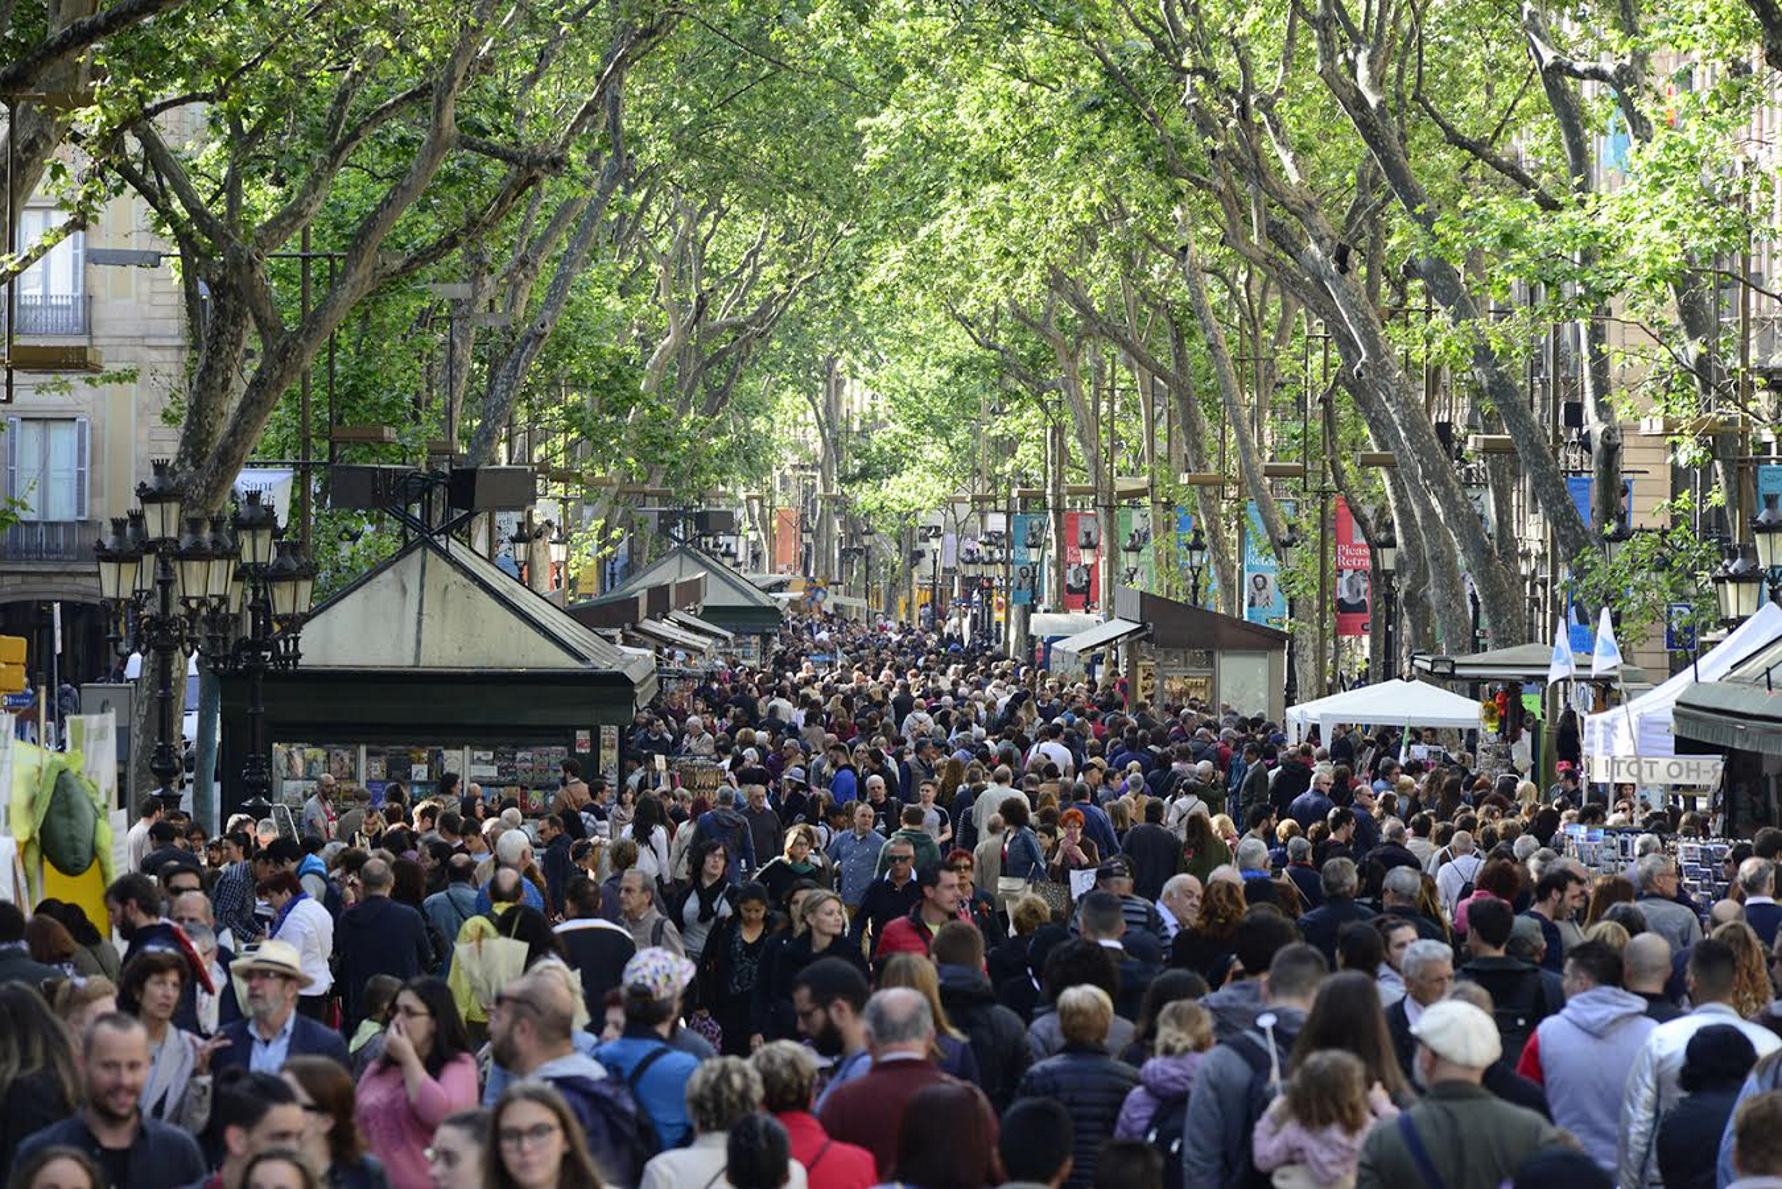 Sant Jordi 2022: What's planned for April 23rd in Catalonia?